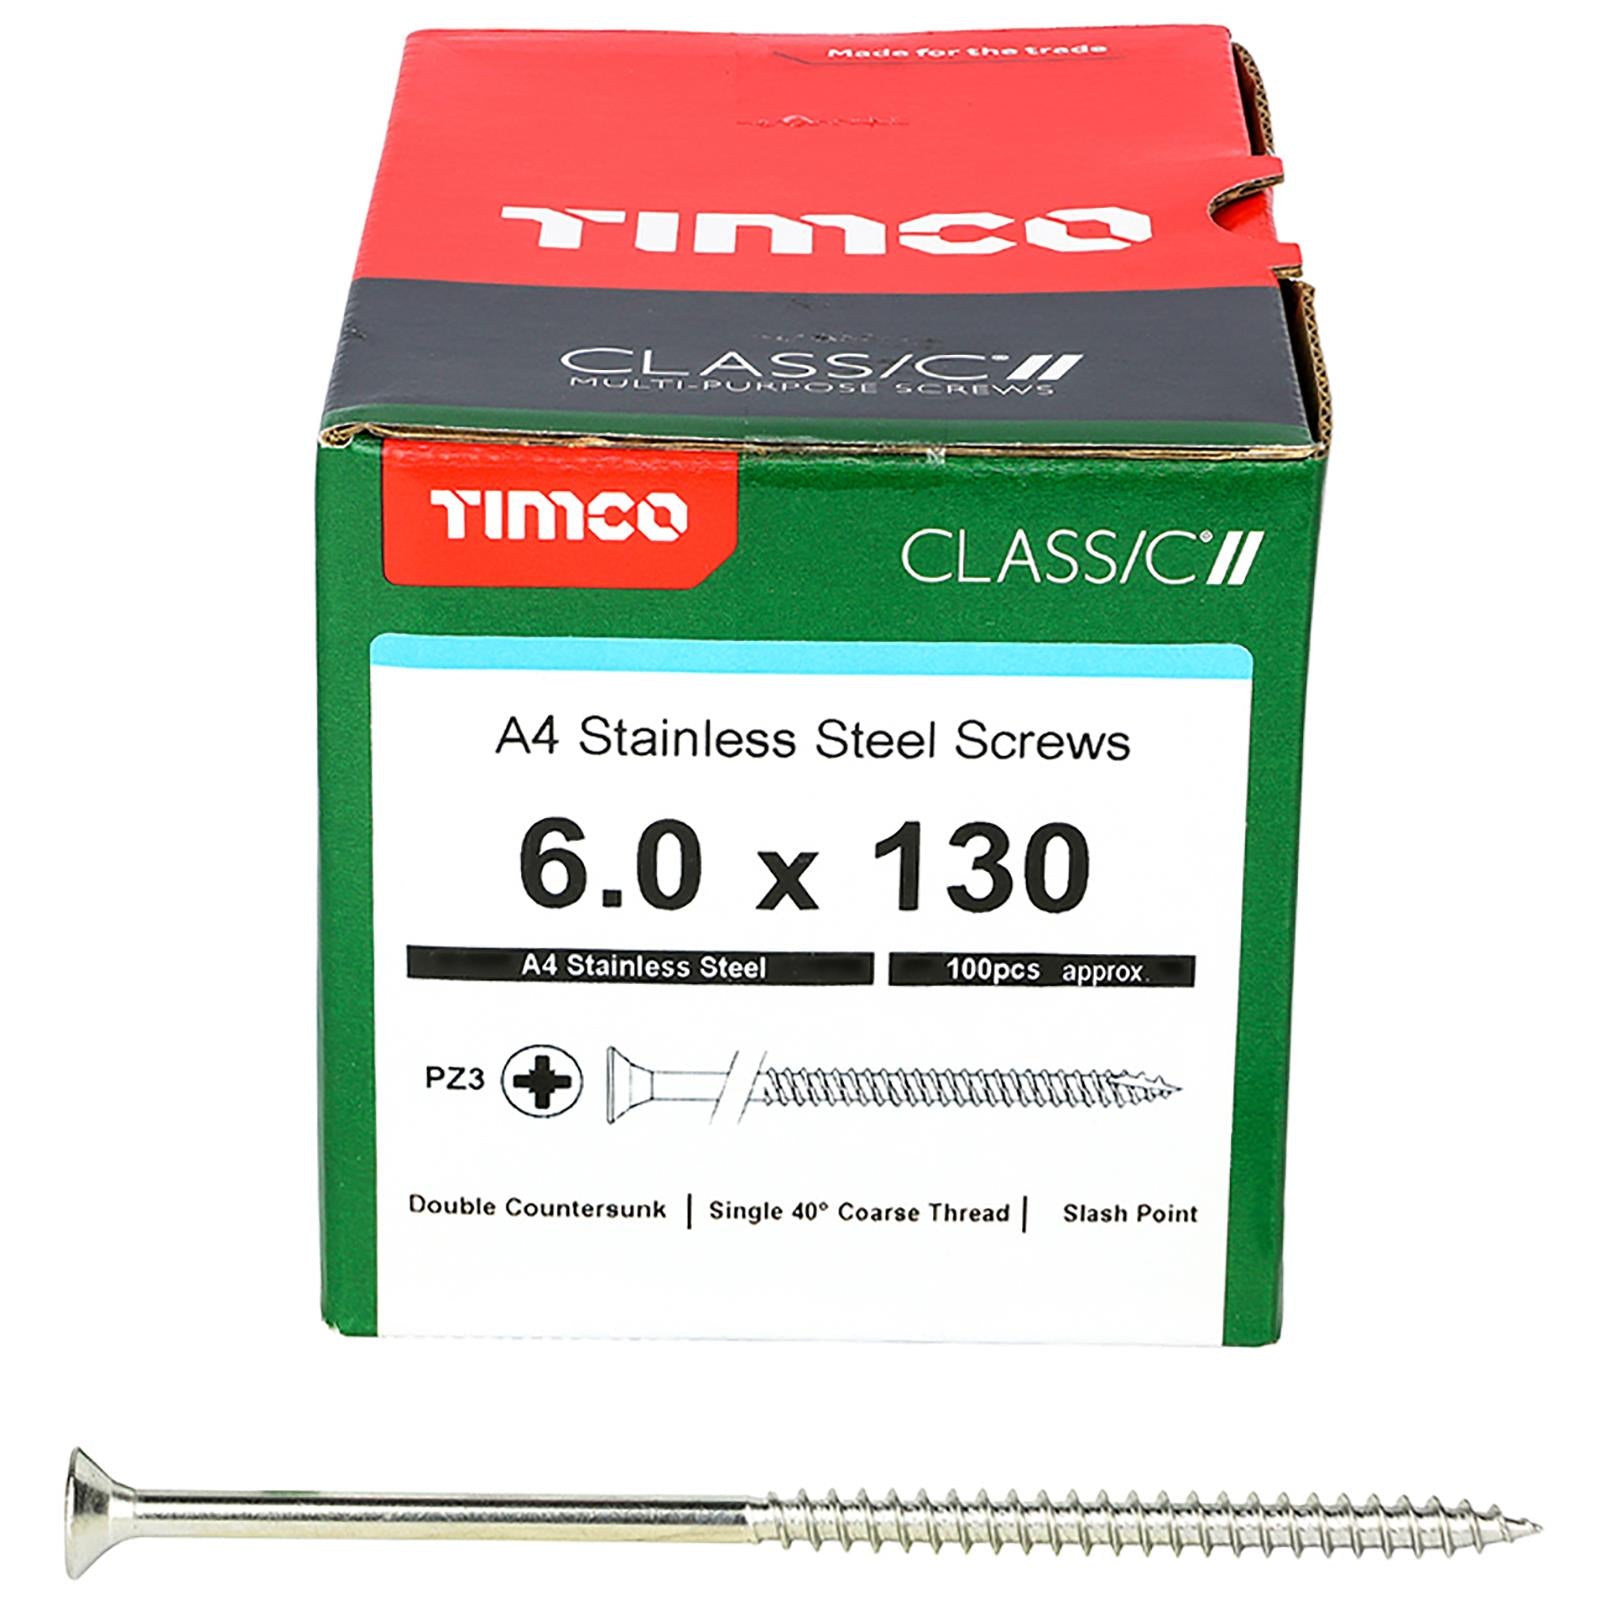 TIMCO Classic Wood Screw A4 Stainless Steel Countersunk Multi Purpose